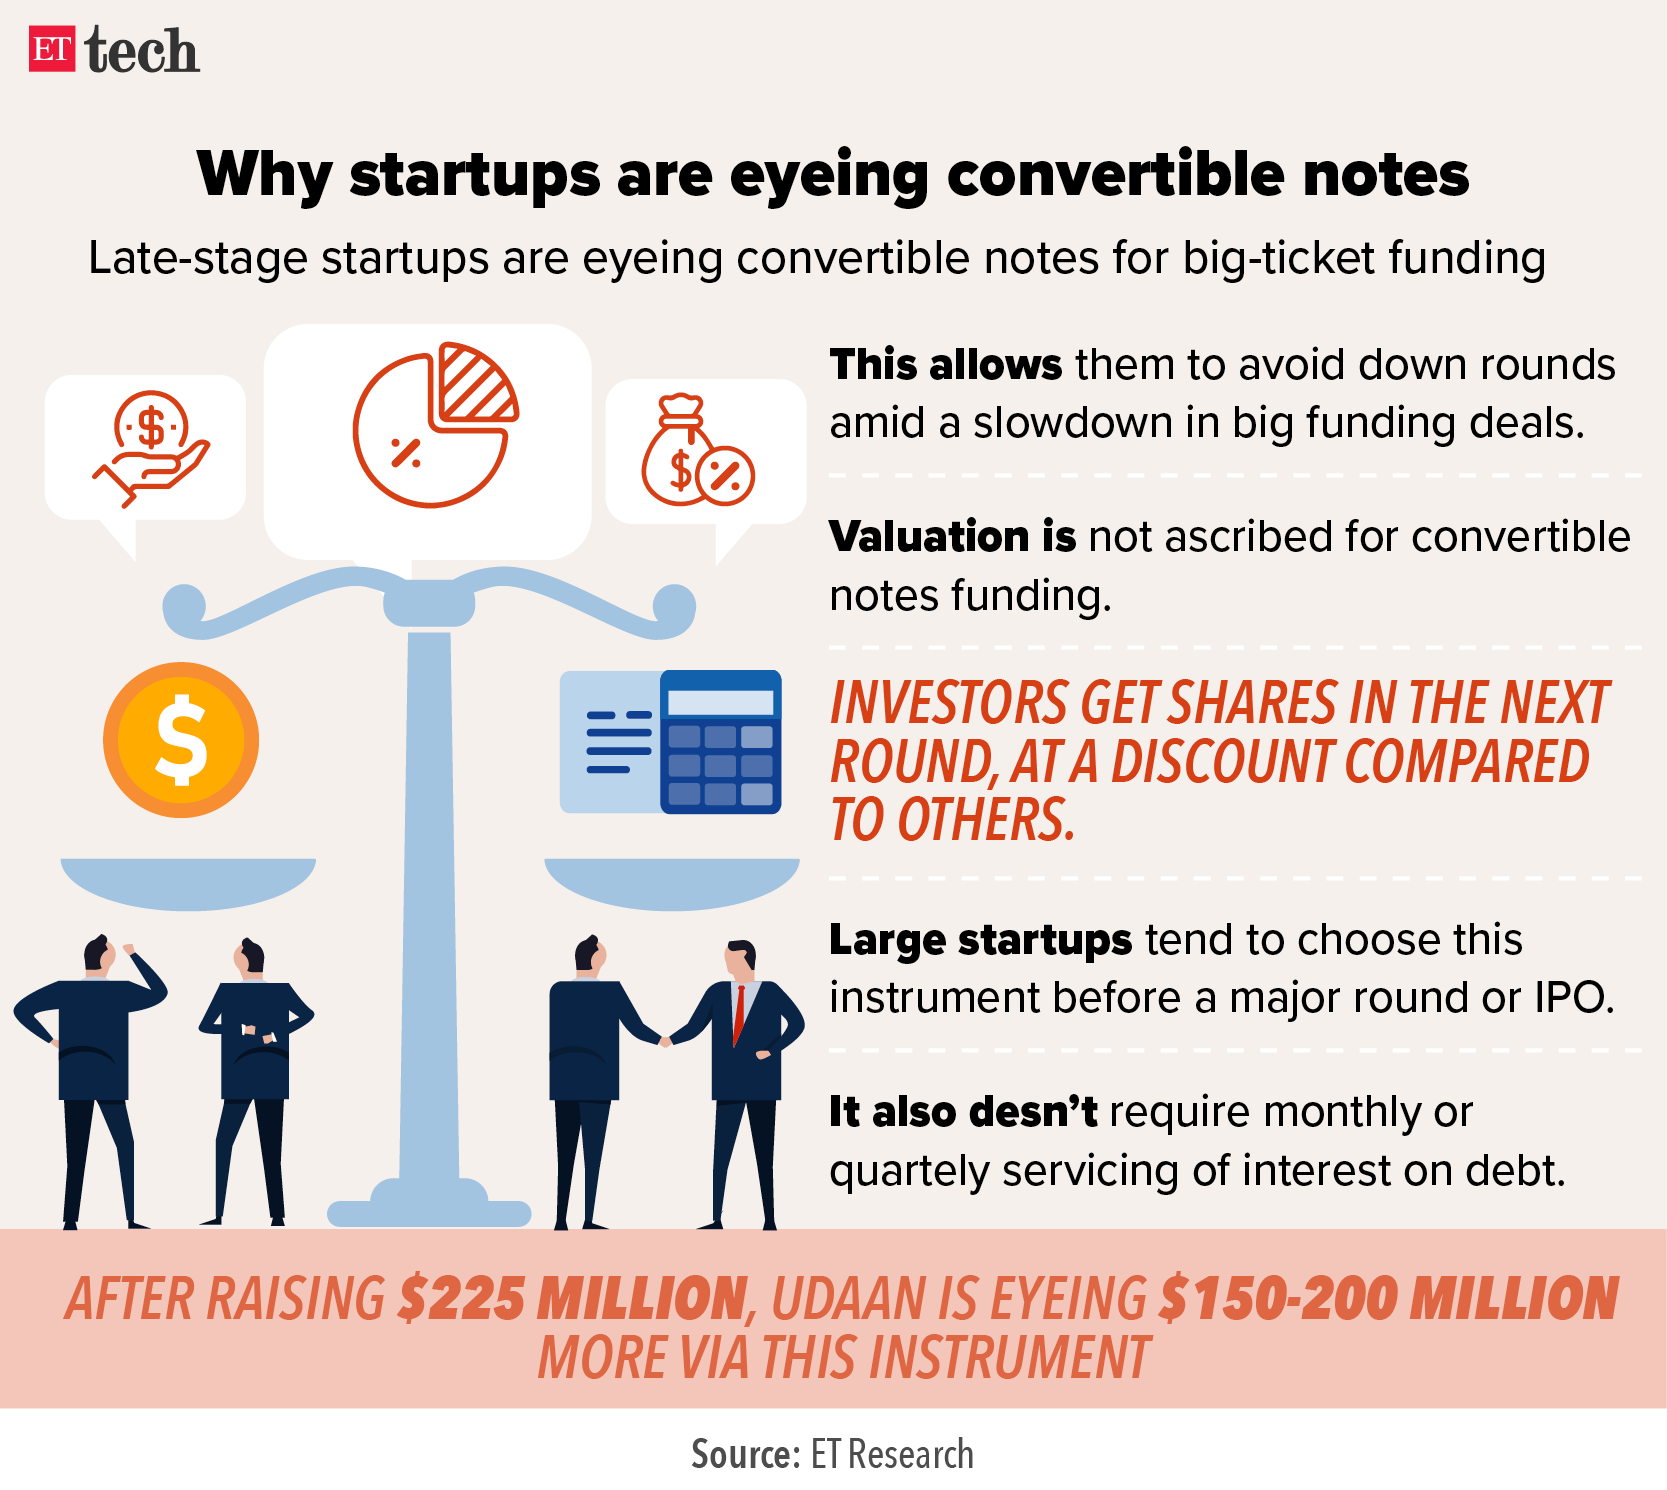 Why are startups targeting convertible_graphic_etech notes?